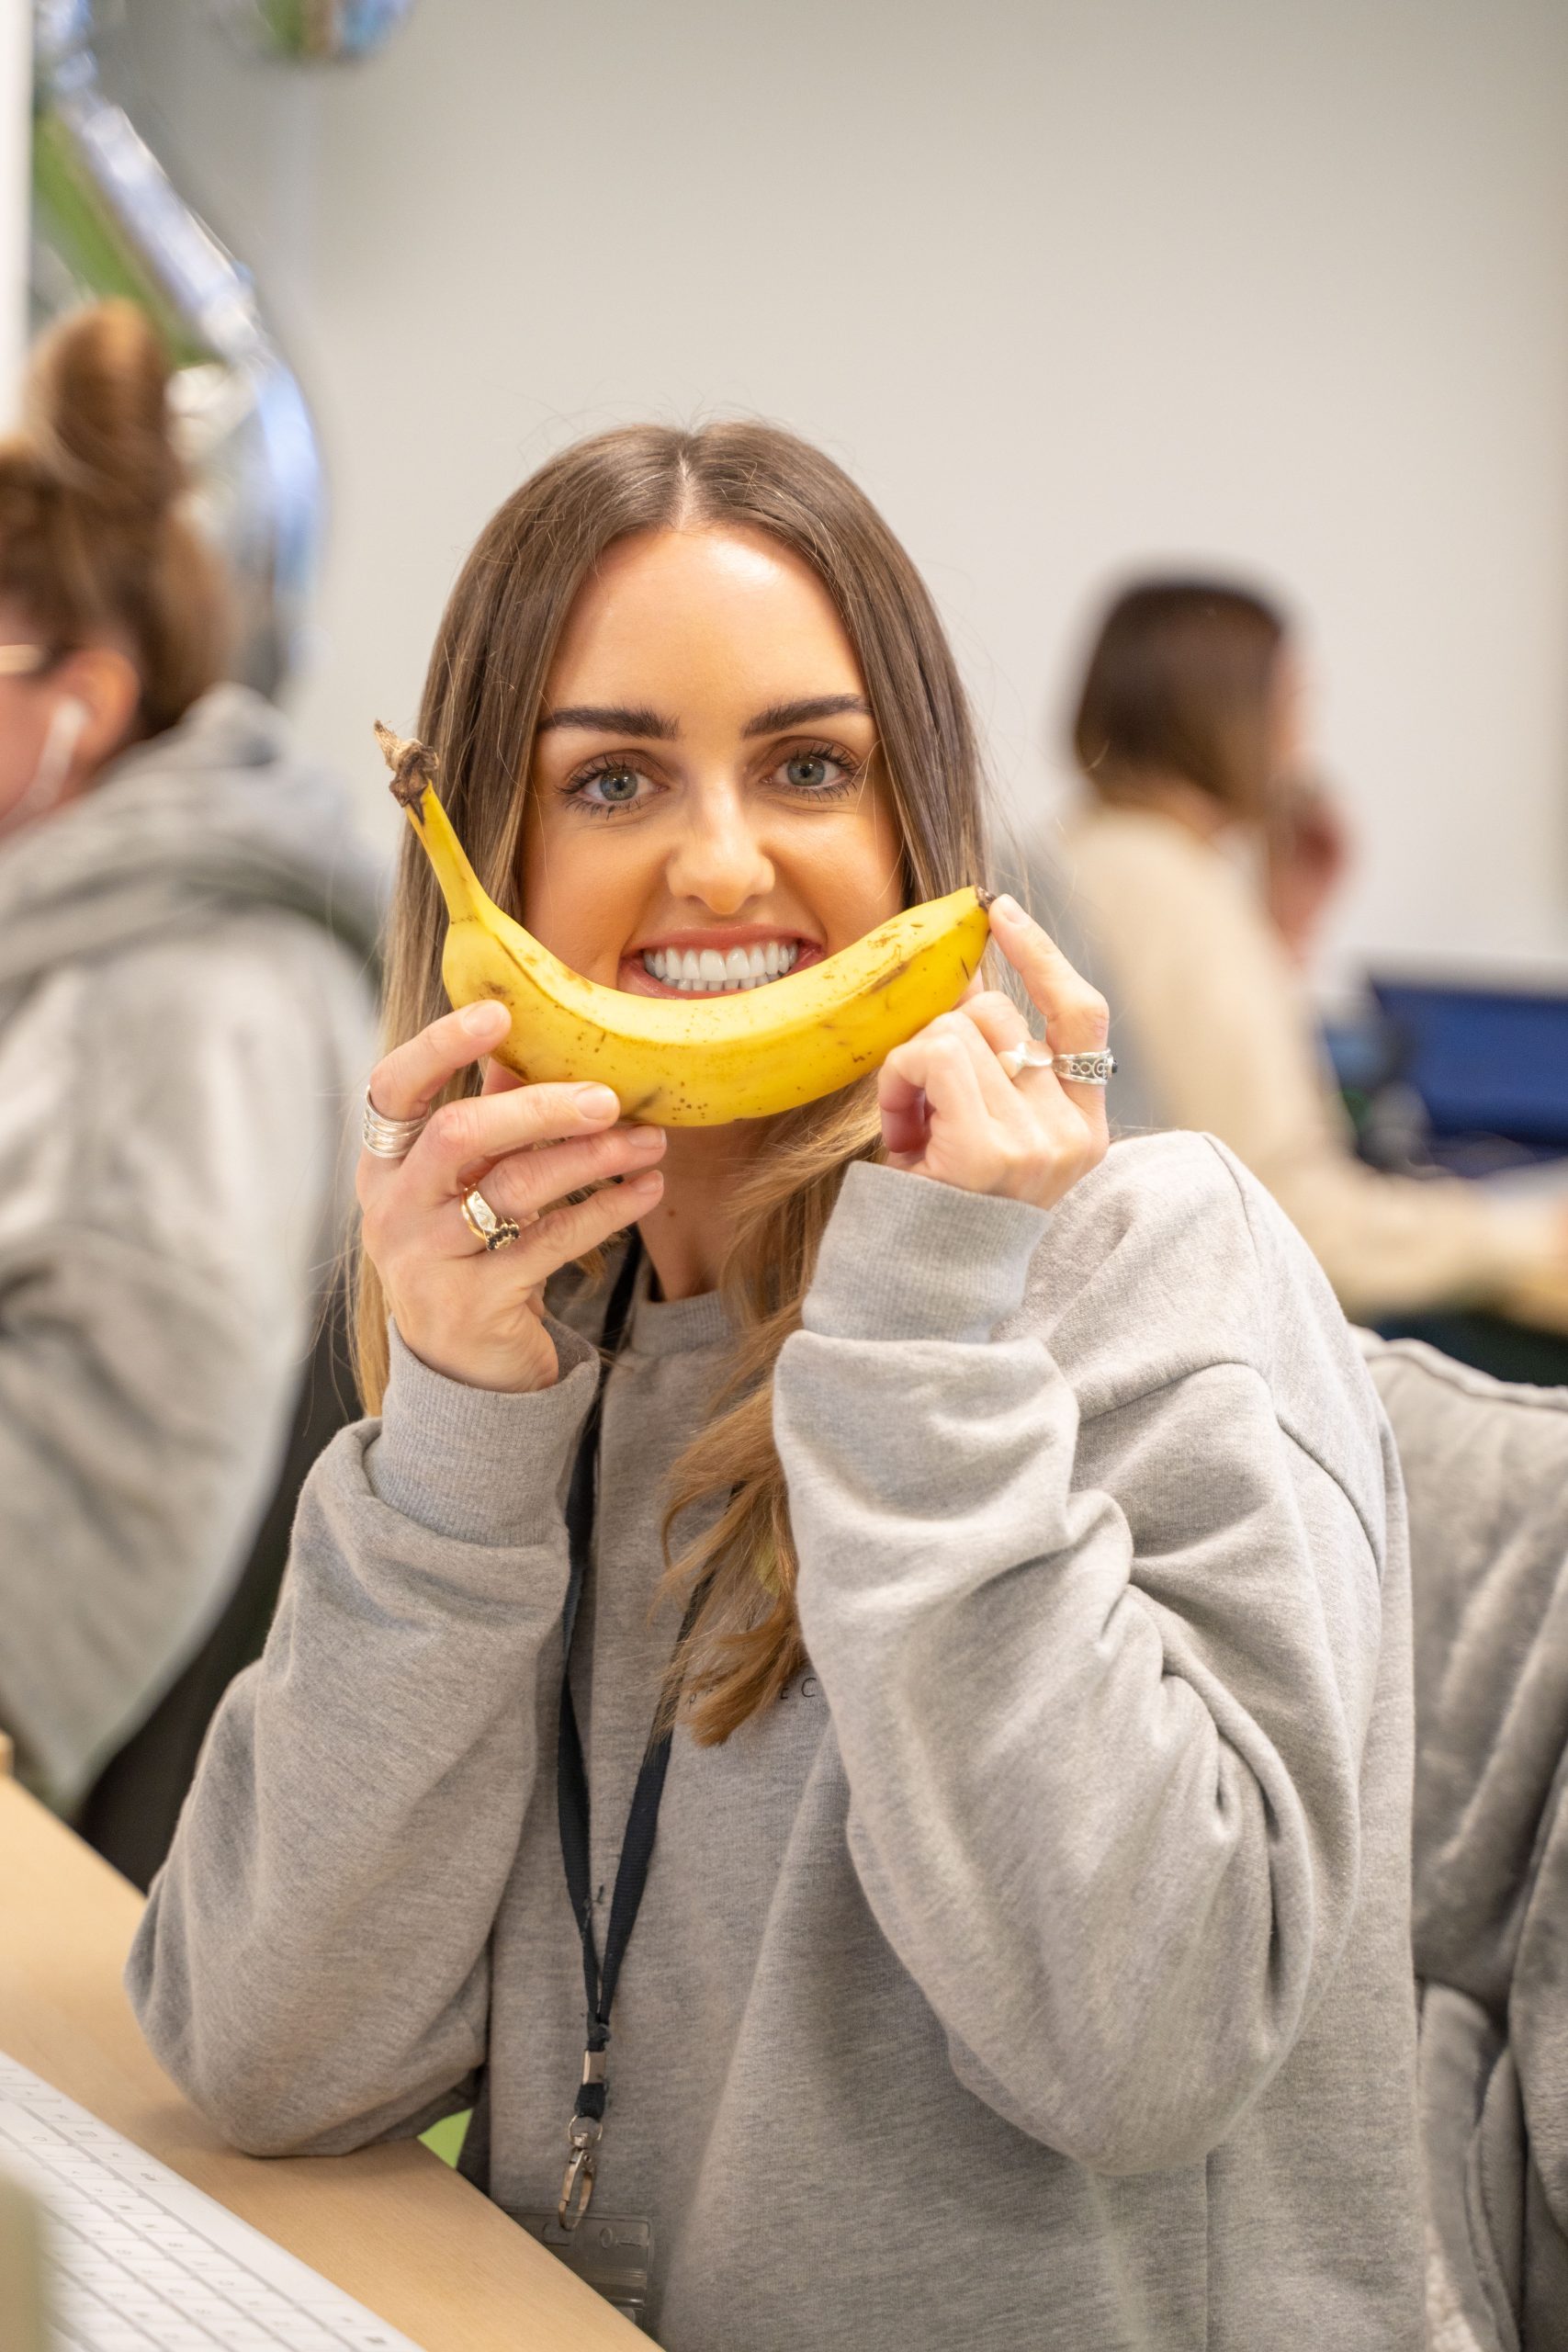 Emily - sat at her desk with a smile on her face as she is holding a banana in front of her face, replicating a smile.